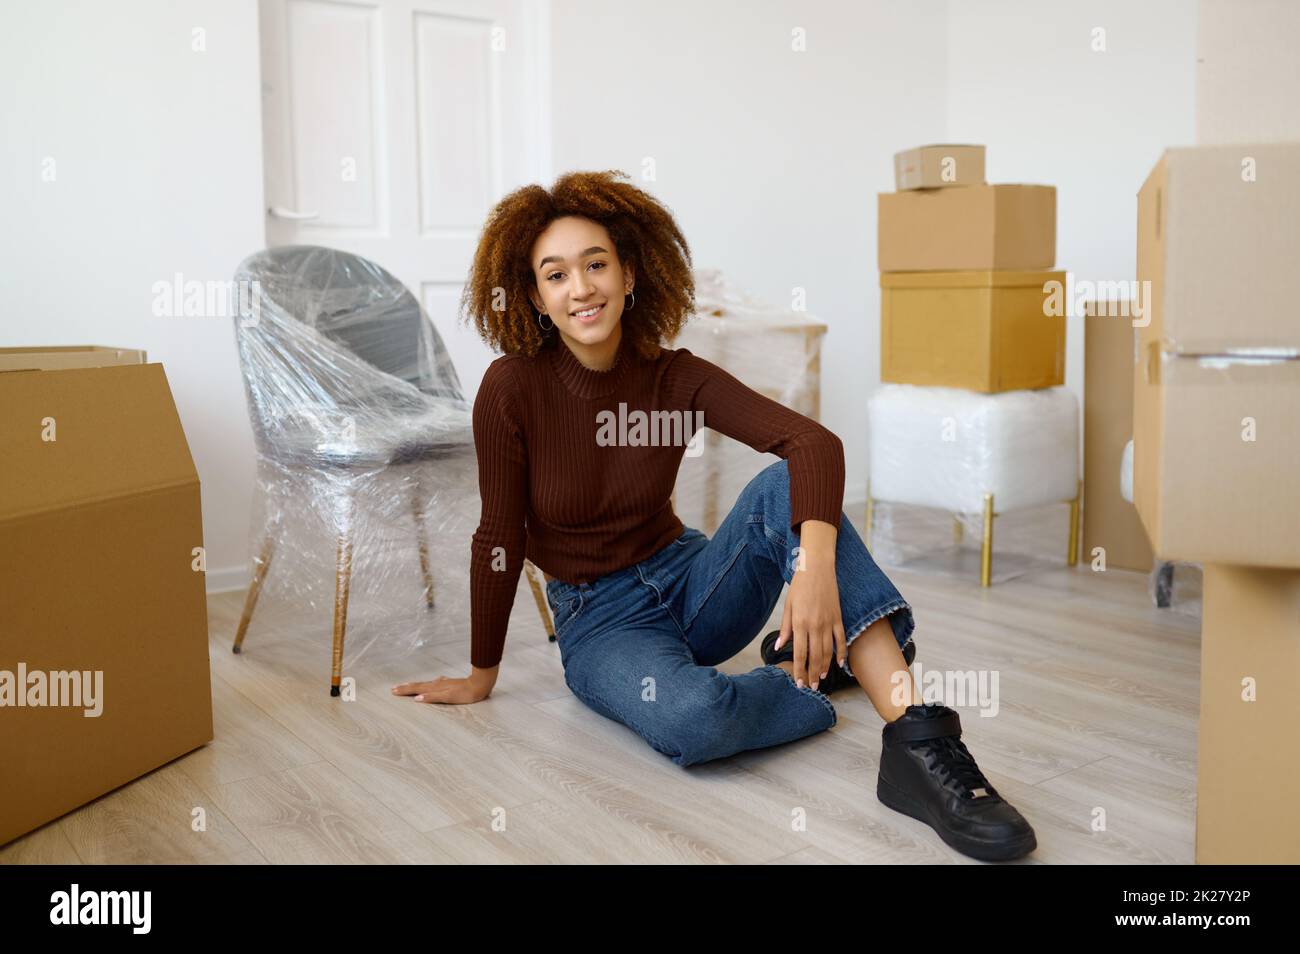 Woman sitting among carton boxes with beginnings Stock Photo